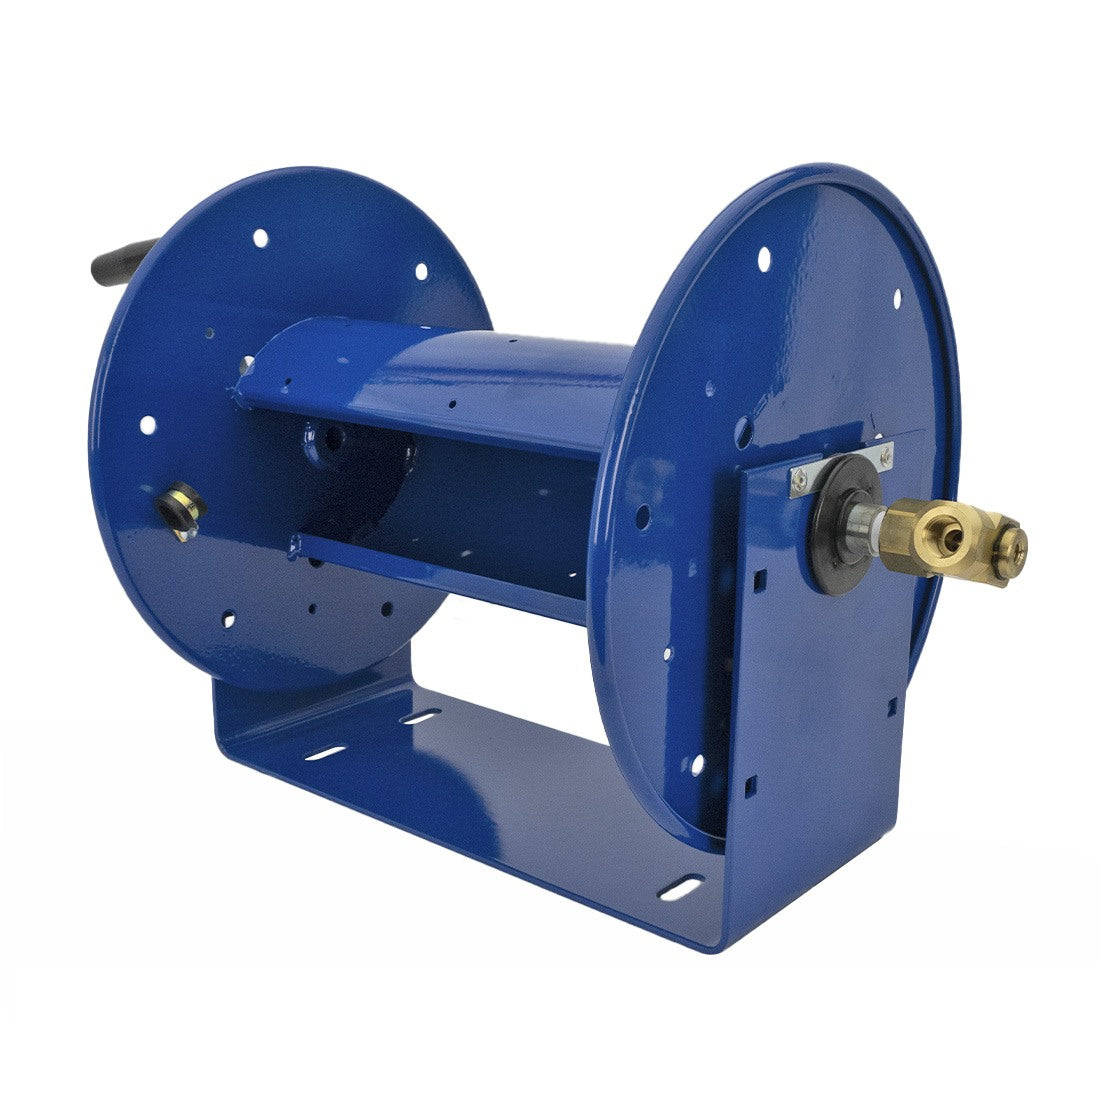 Cleaning hose reel - HDD6200 - HANNAY REELS - pressure wash hose /  motorized / fixed